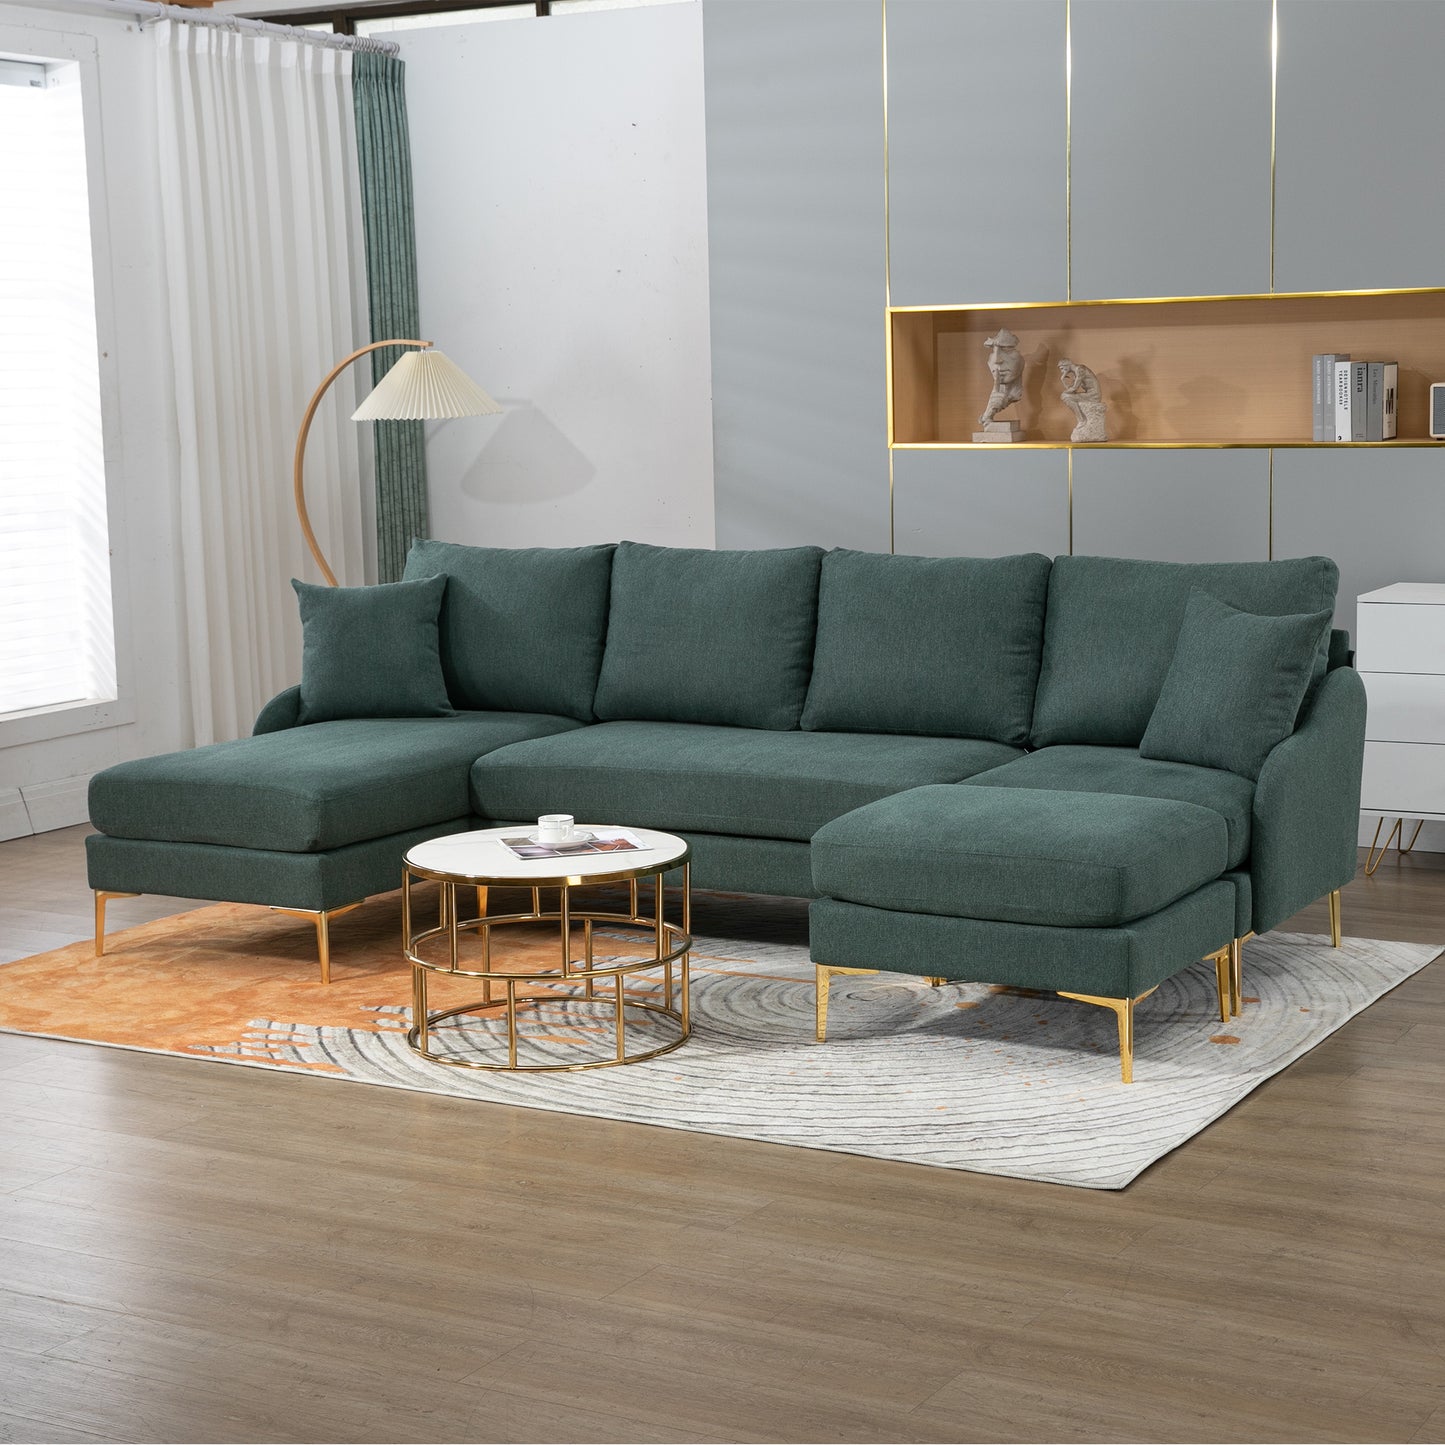 110'' Wide Customizable Reversible Sectional Sofa with Chaise Lounge in Green Polyester Blend